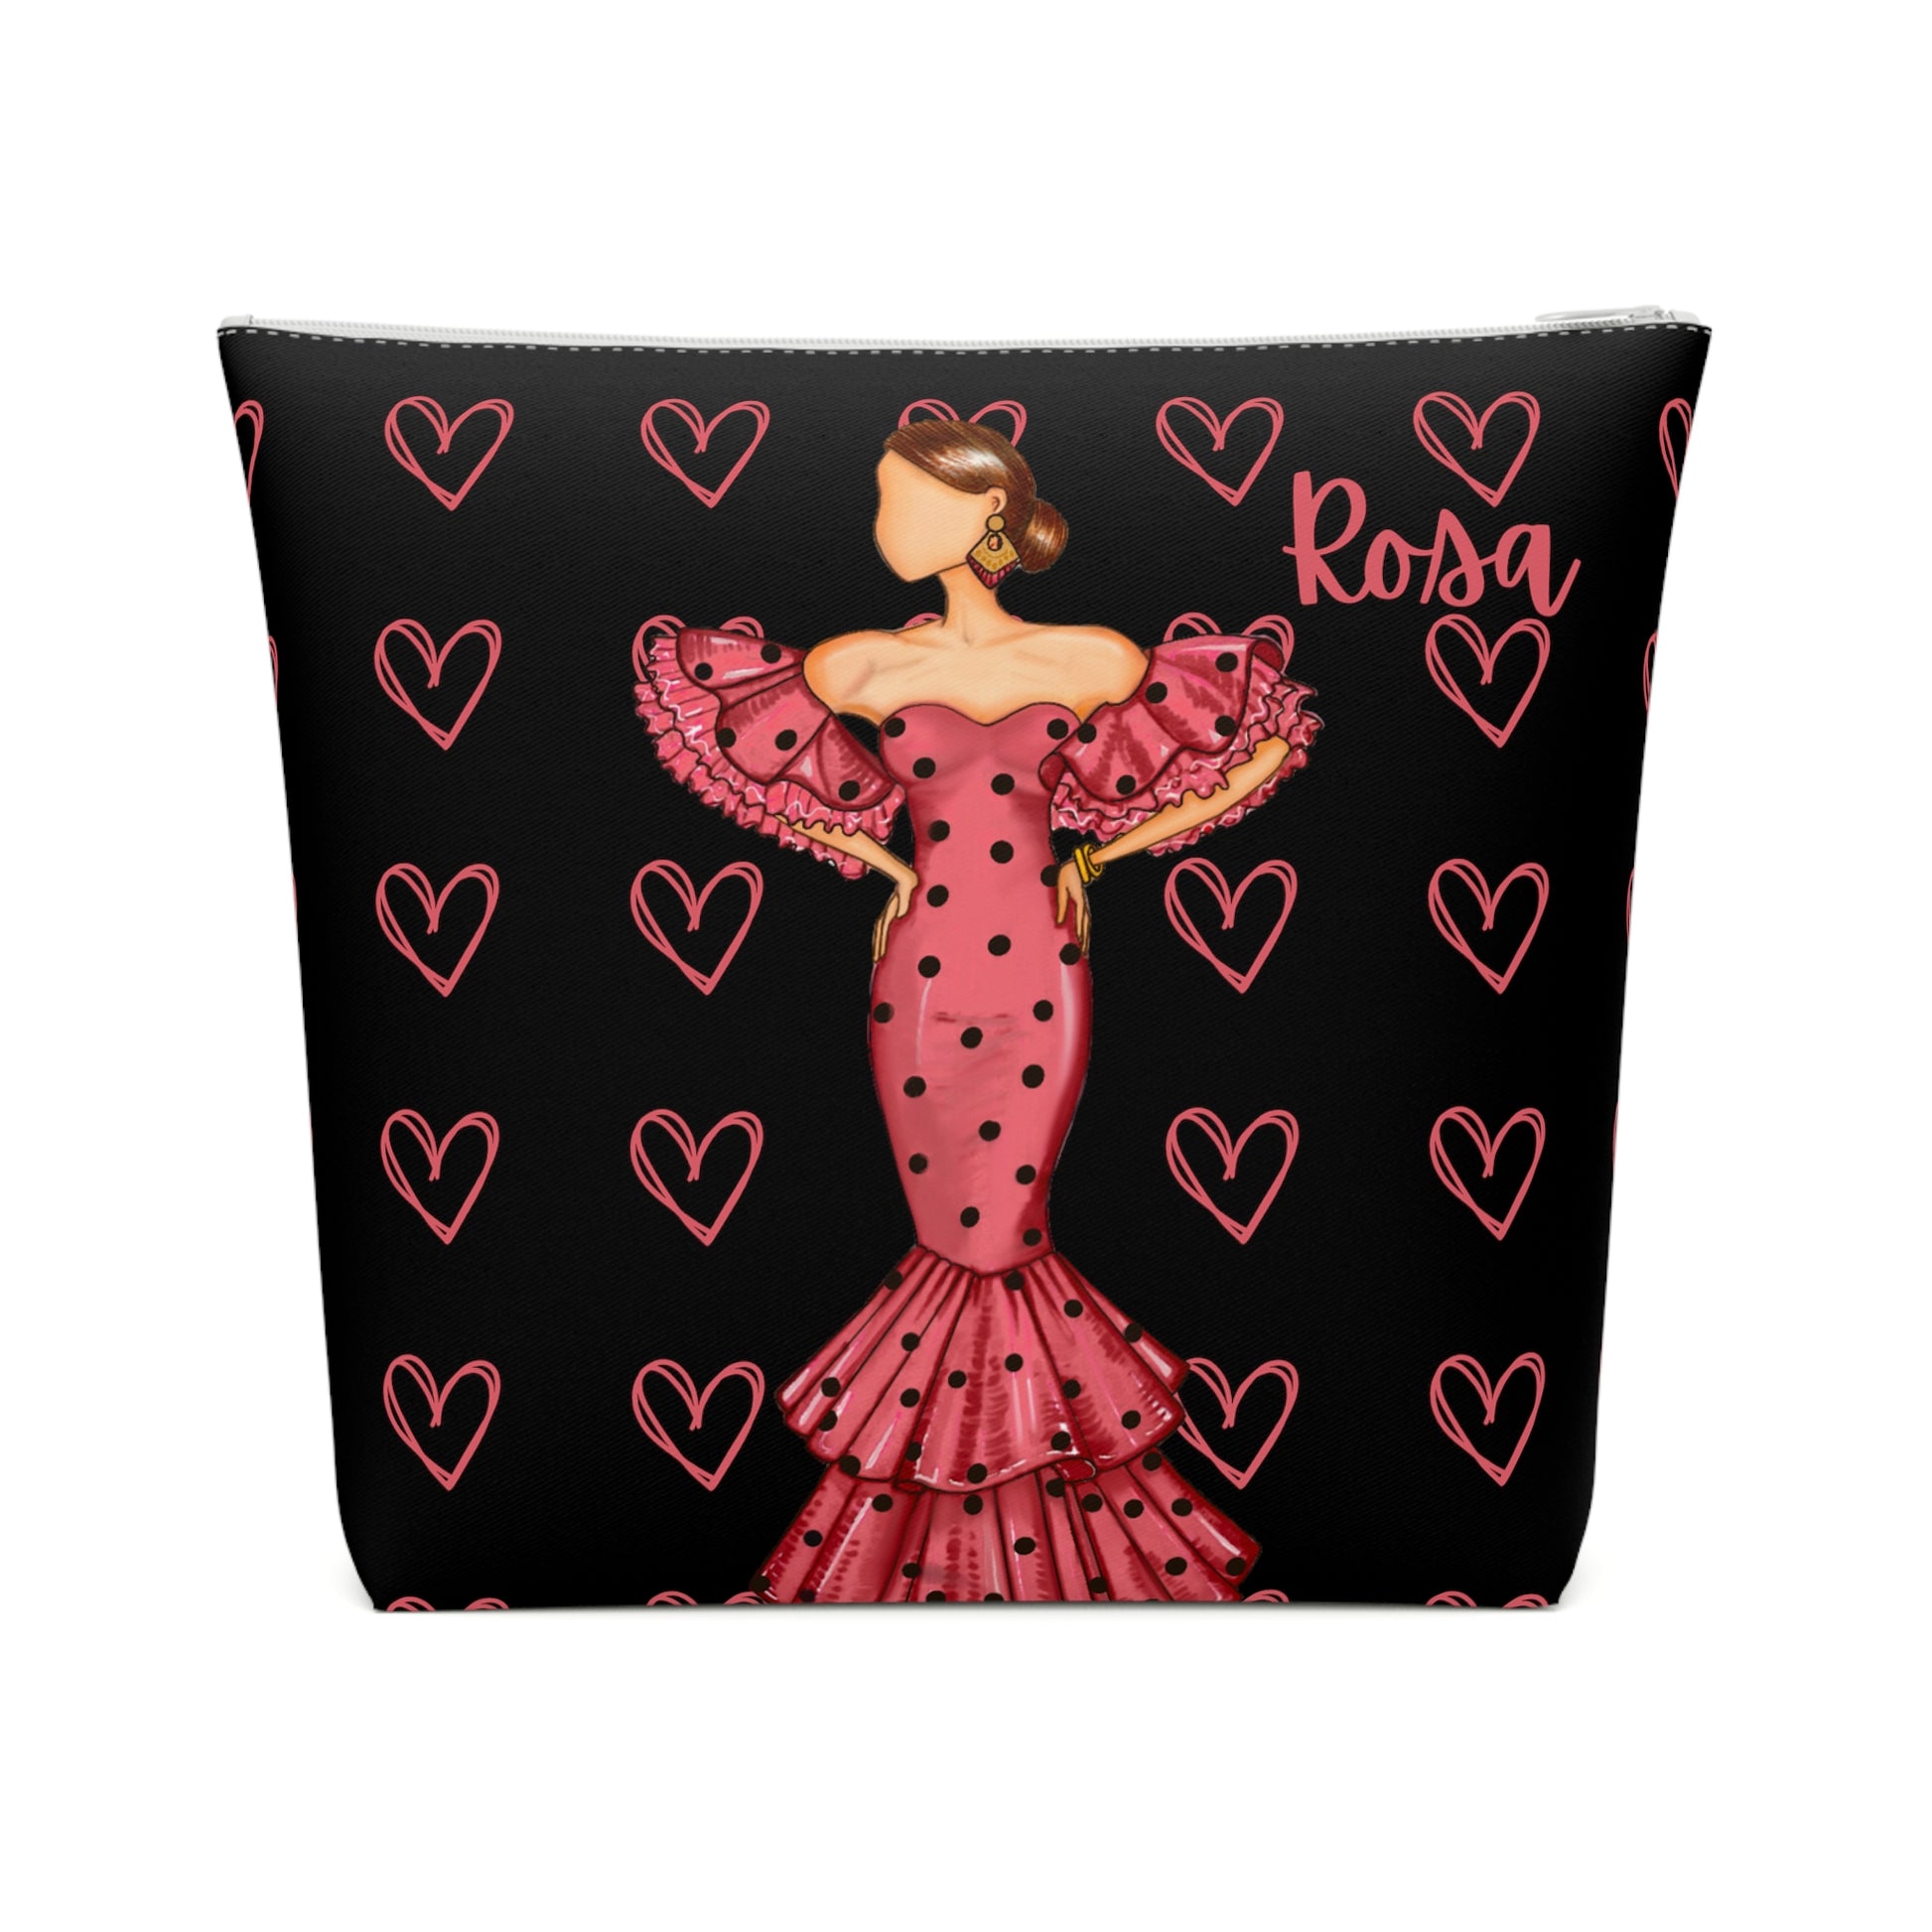 a woman in a pink dress with hearts on a black background